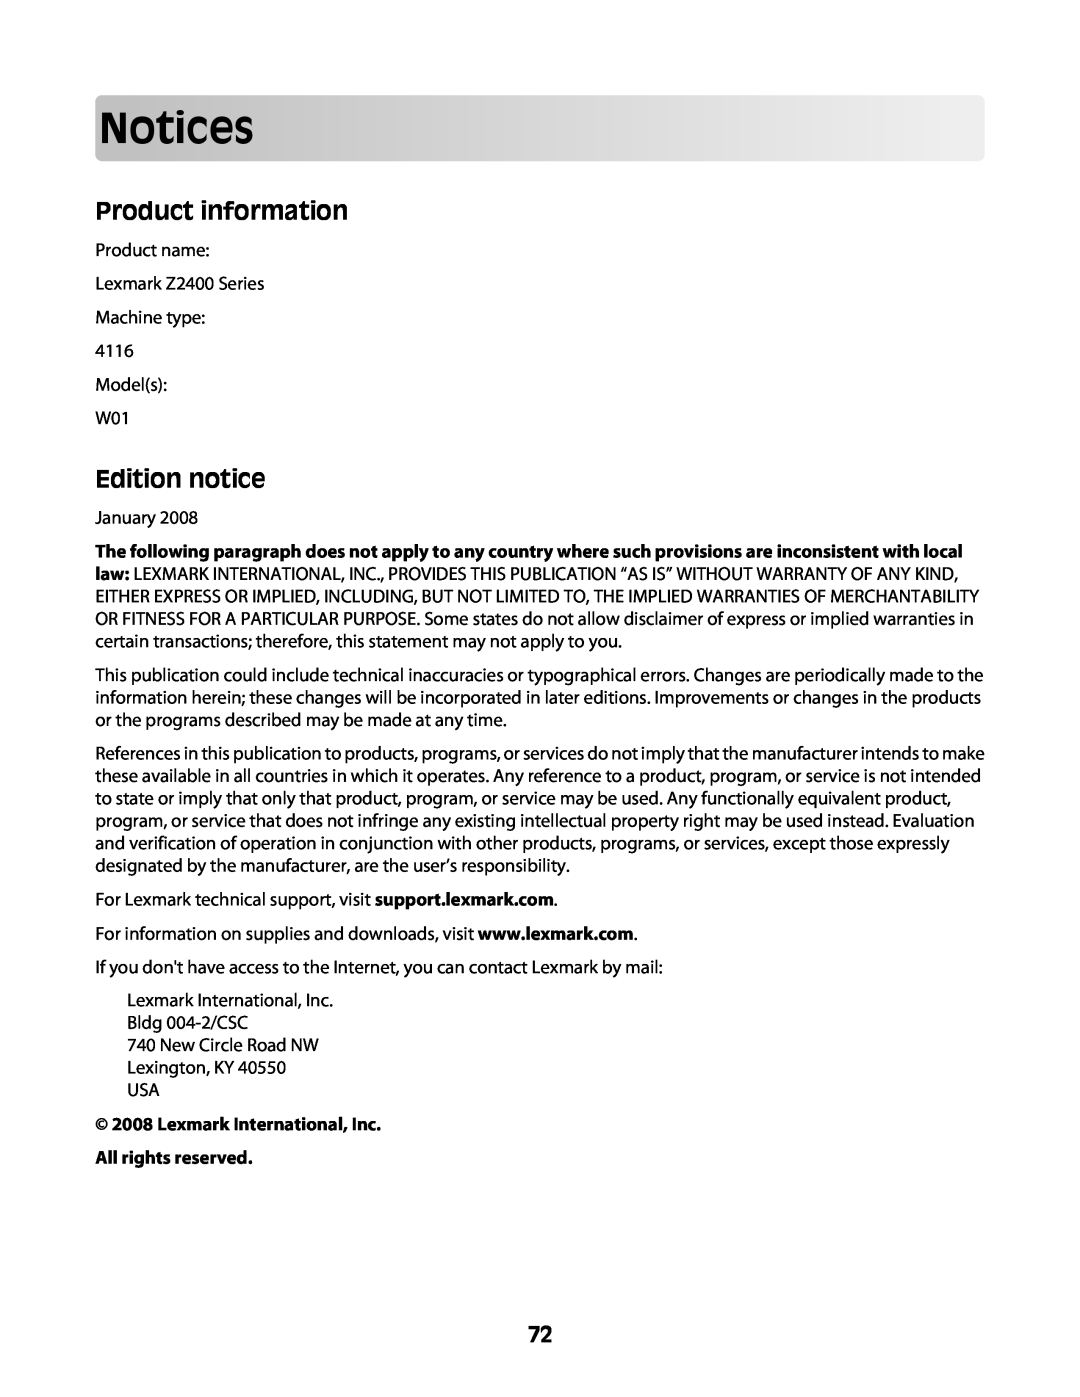 Lexmark Z2400 Series manual Notices, Product information, Edition notice, Lexmark International, Inc. All rights reserved 